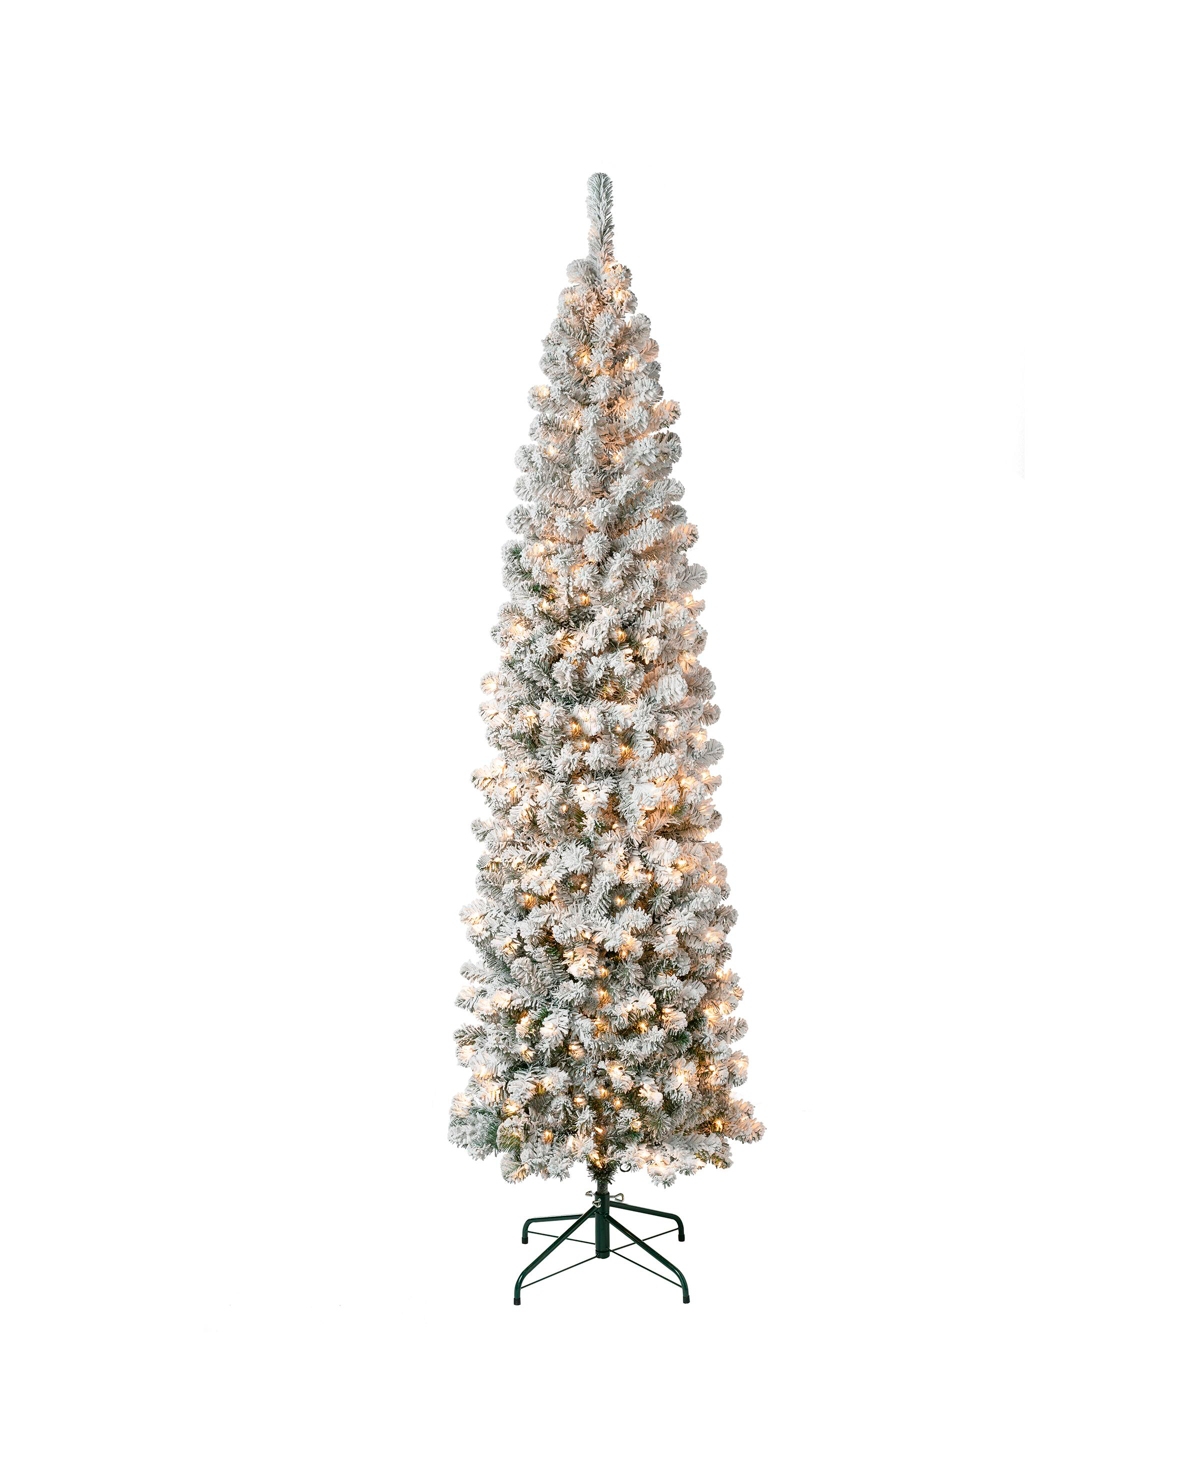 National Tree Company First Traditions 7.5' Acacia Pencil Slim Flocked Tree With Clear Lights In Green